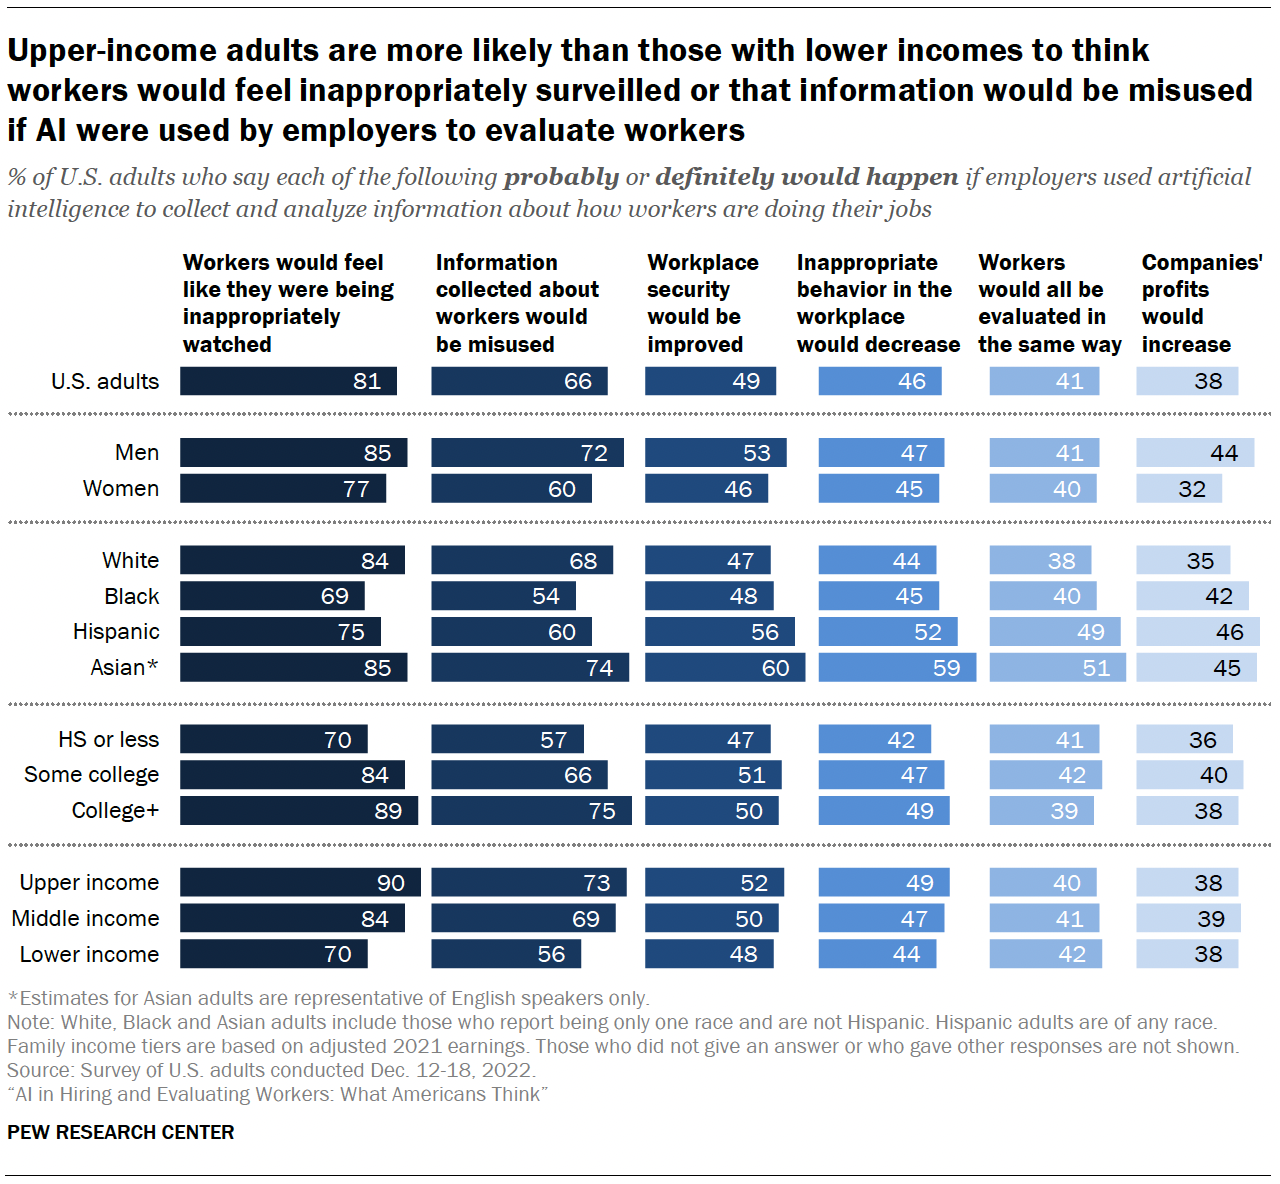 Upper-income adults are more likely than those with lower incomes to think workers would feel inappropriately surveilled or that information would be misused if AI were used by employers to evaluate workers